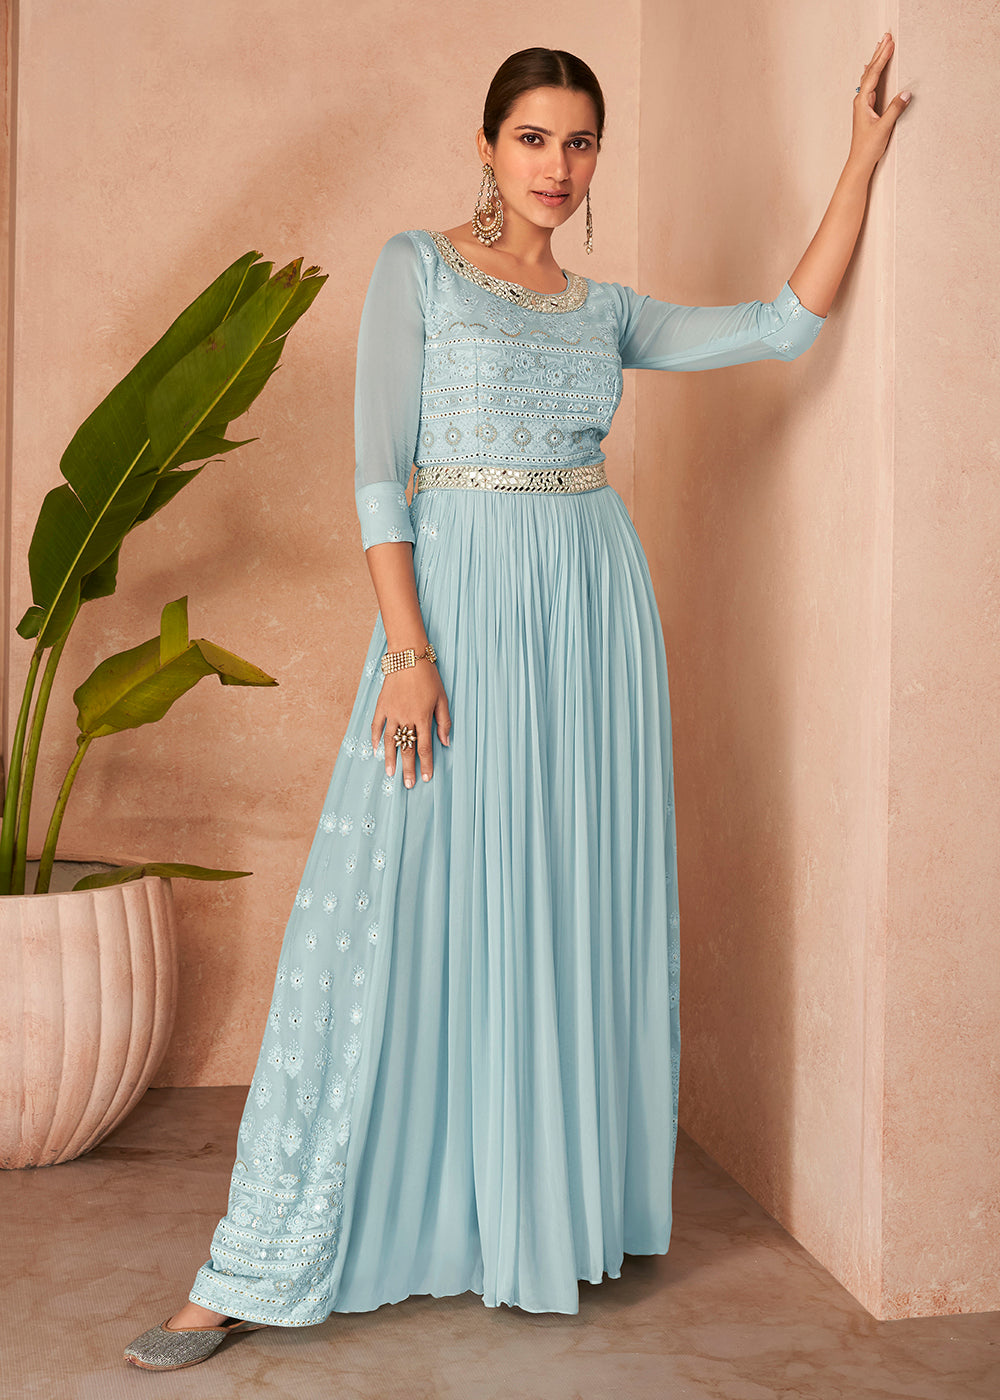 Evening Gowns in Dubai: Bloomingdales, Esposa Prive & More - MyBayut